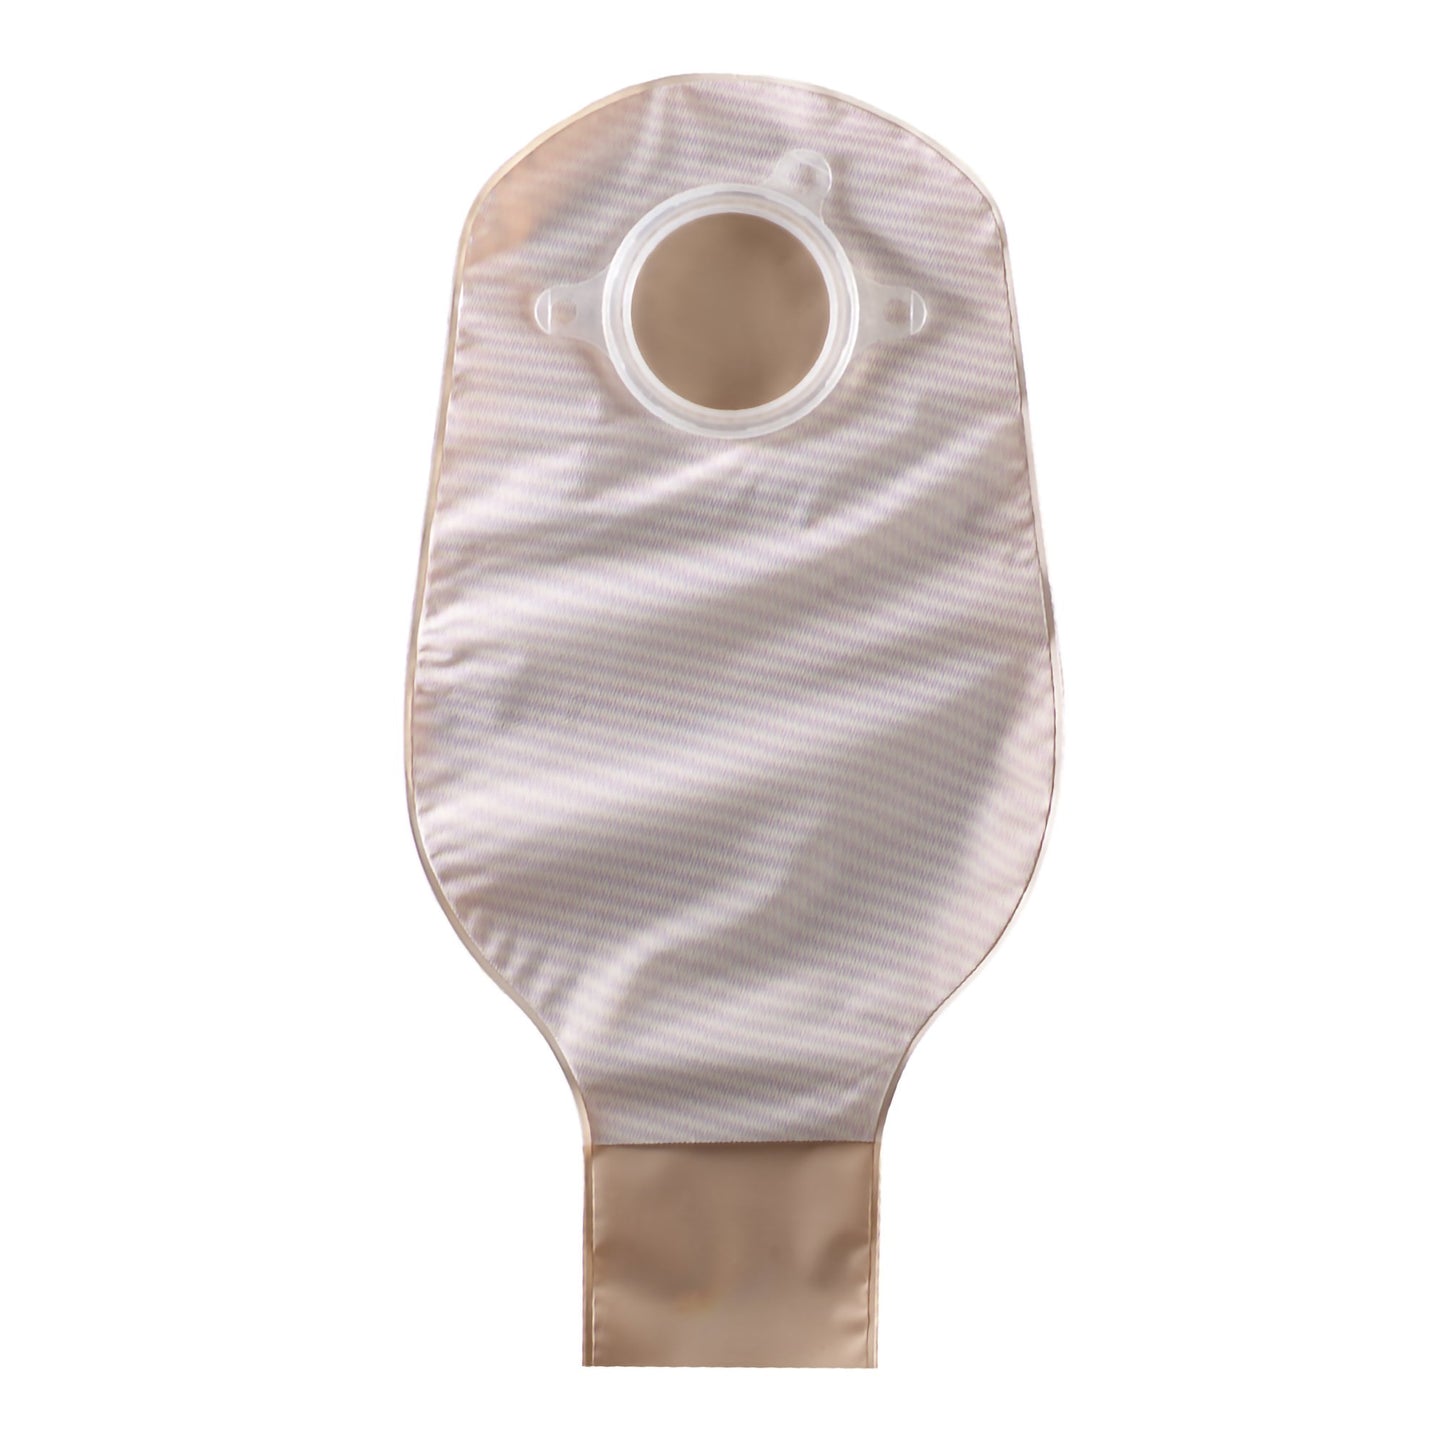 Sur-Fit Natura® Two-Piece Drainable Opaque Colostomy Pouch, 10 Inch Length, 1.25 Inch Flange, 10 ct